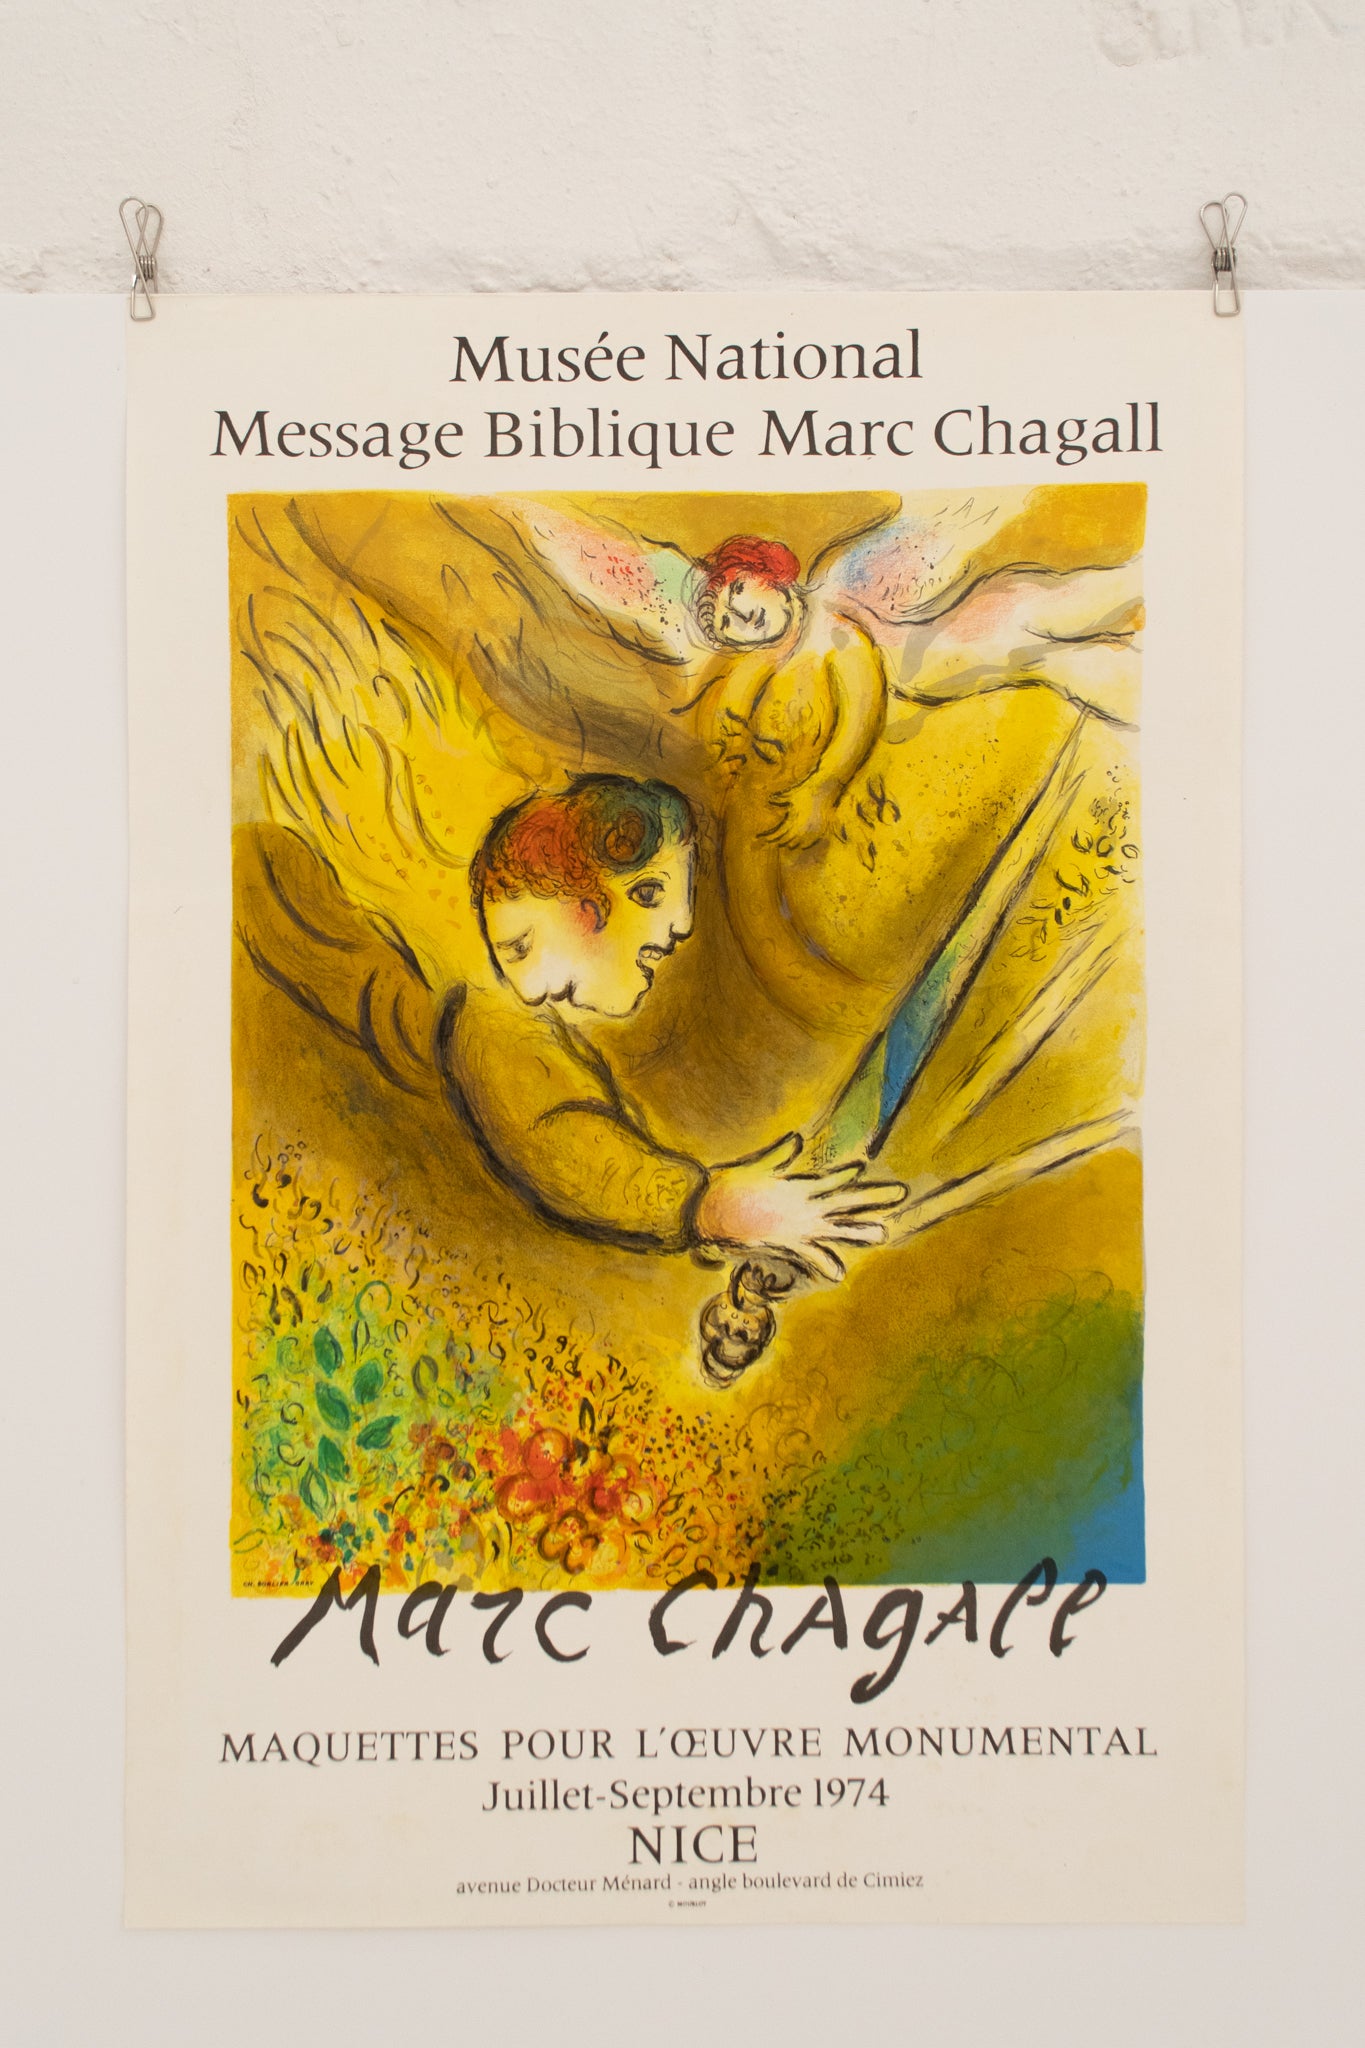 Marc Chagall "The Angel of Judgement" Musee National 1974 Lithograph Print